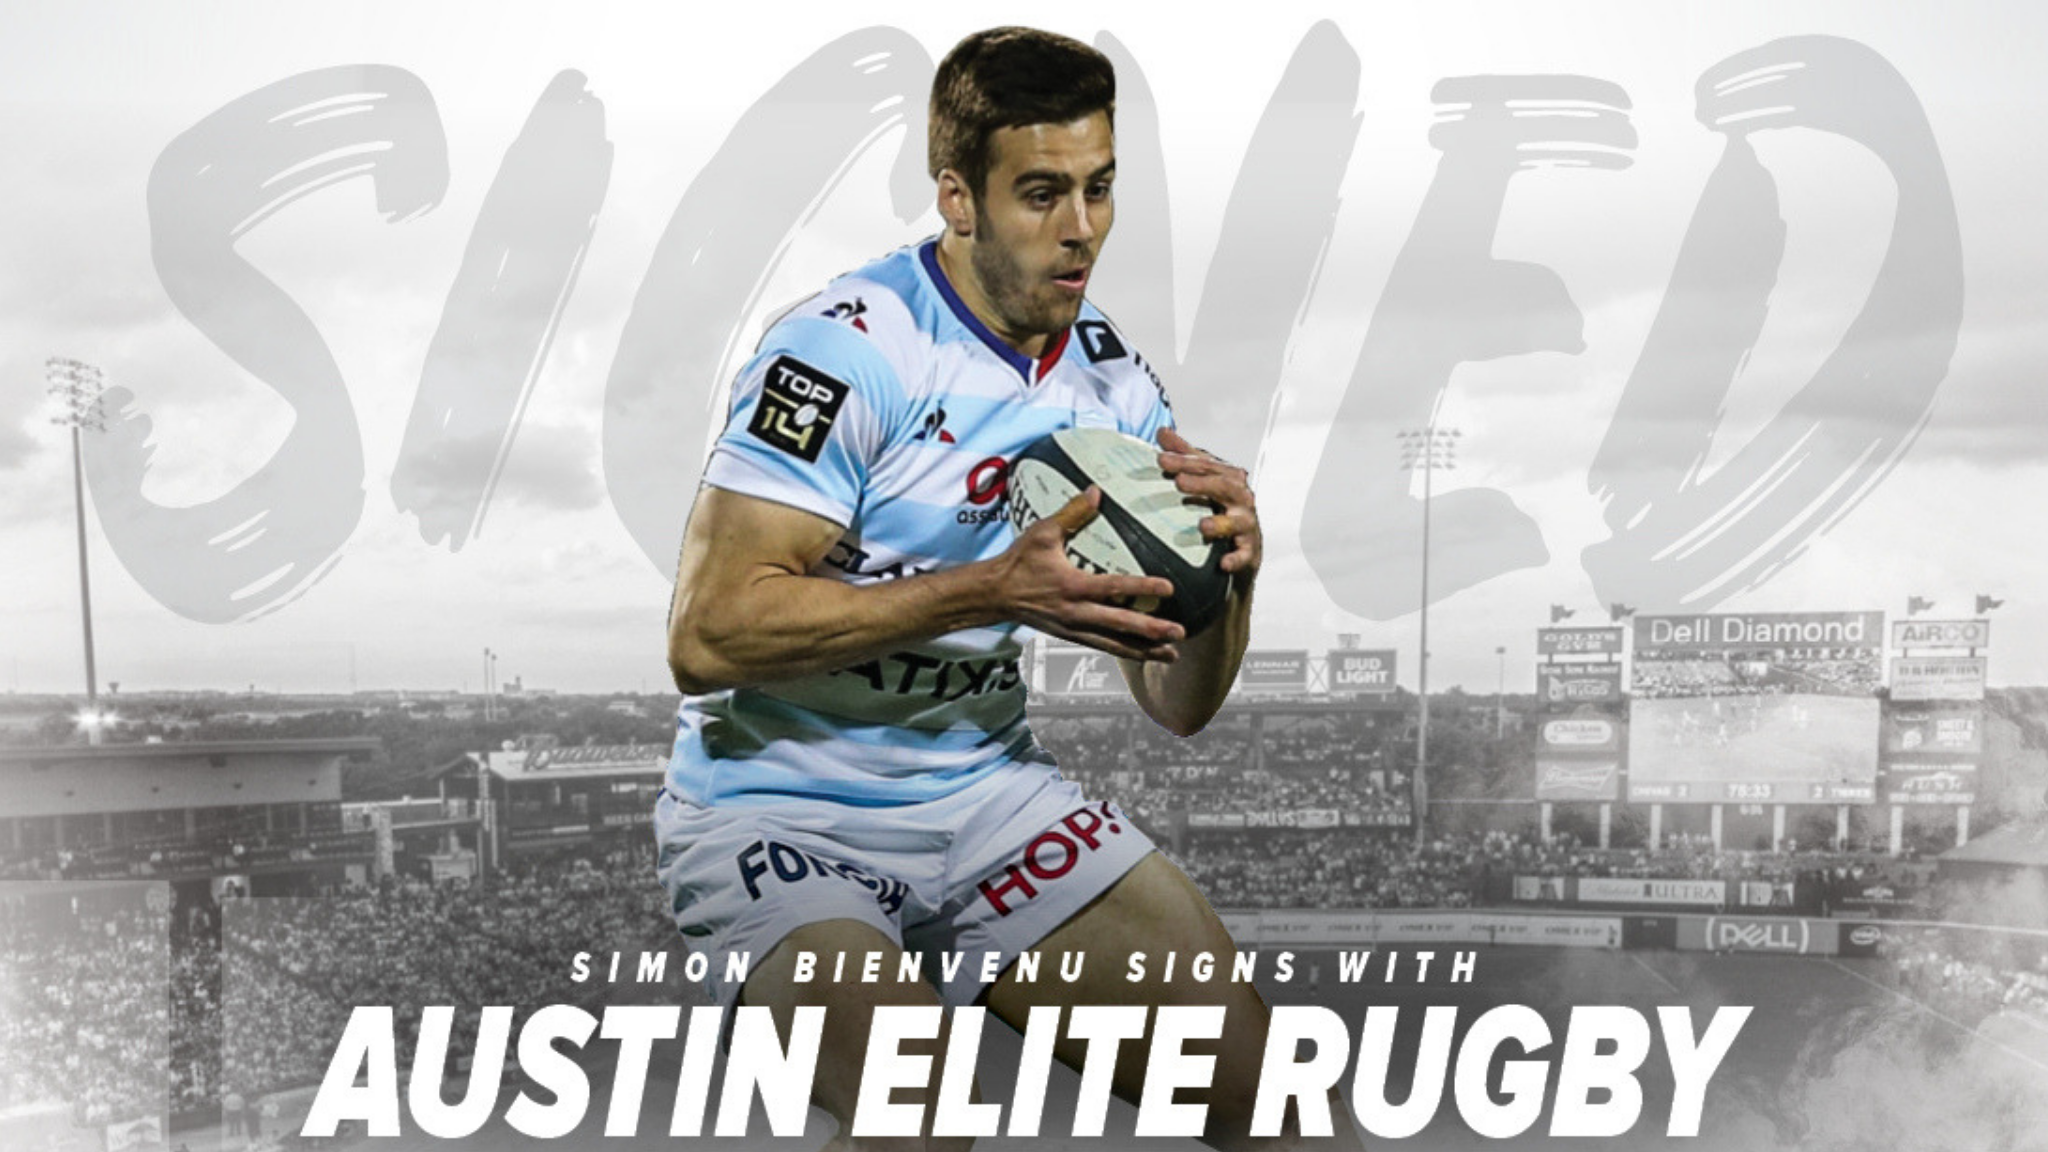 Austin Elite Rugby Signs French Center, Simon Bienvenu from Racing 92